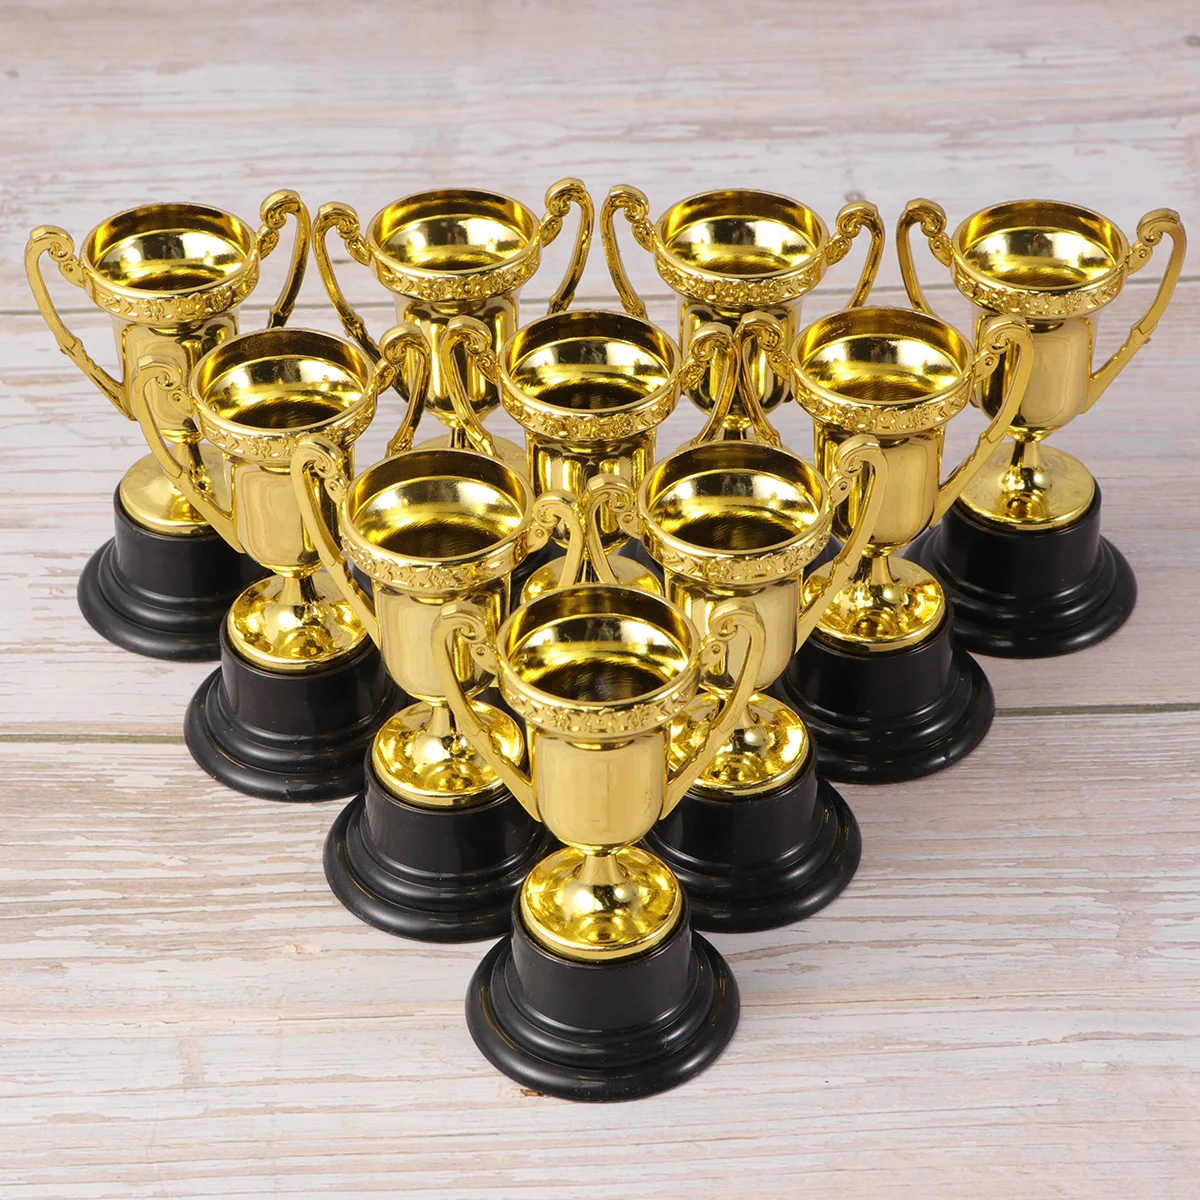 

25pcs Audlt Kids Kids Toys Plastic Student Sports Award Trophy with Base Reward Competitions Children for Game School